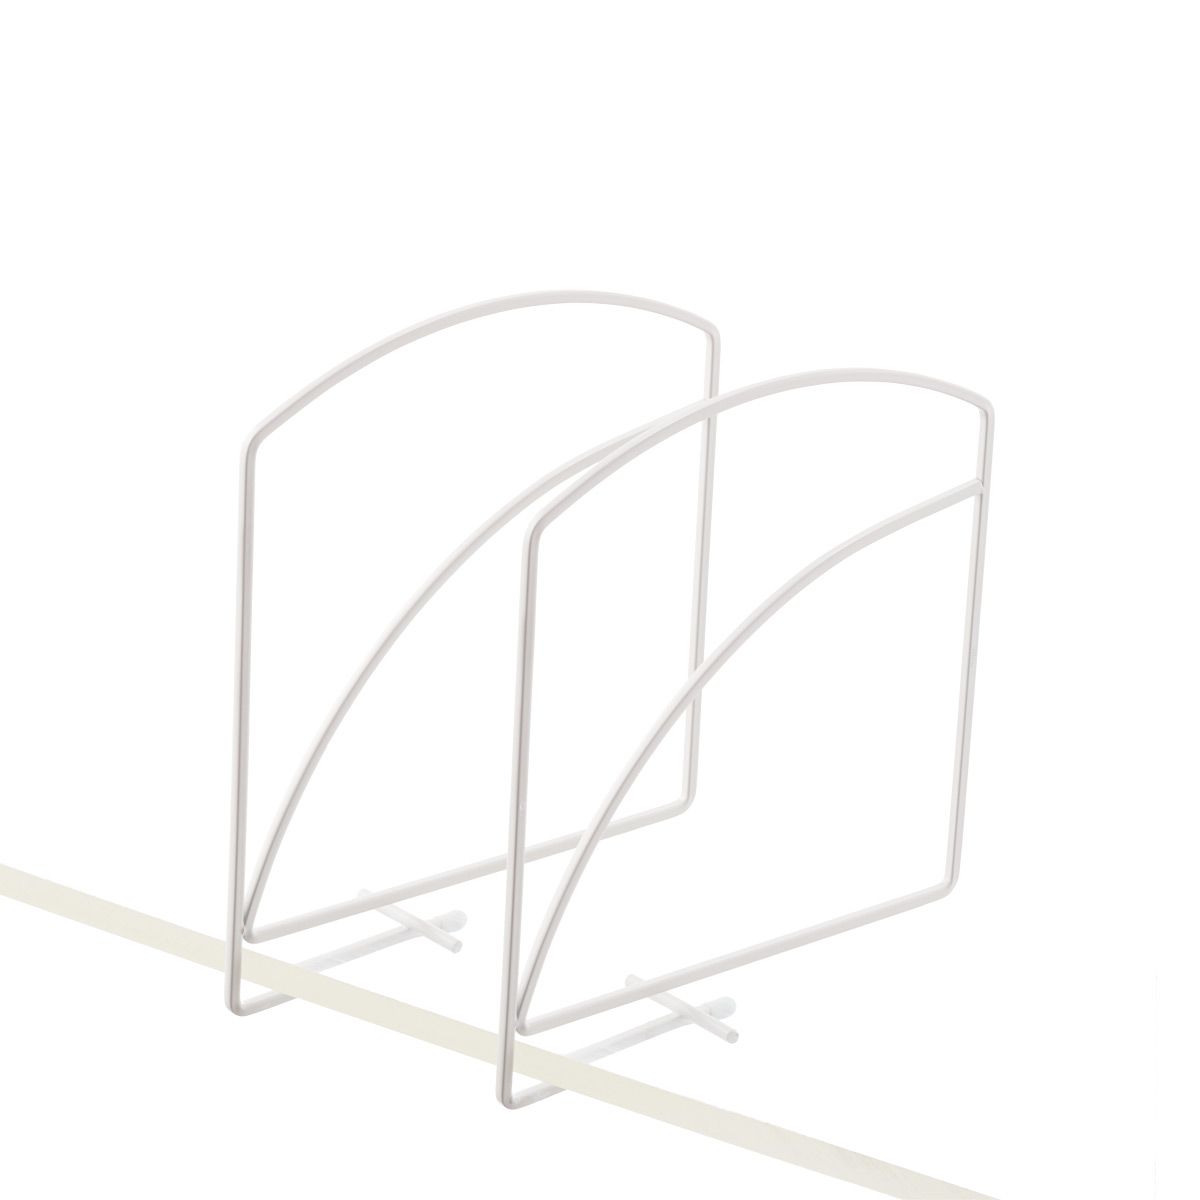 Solid Shelf Dividers | The Container Store